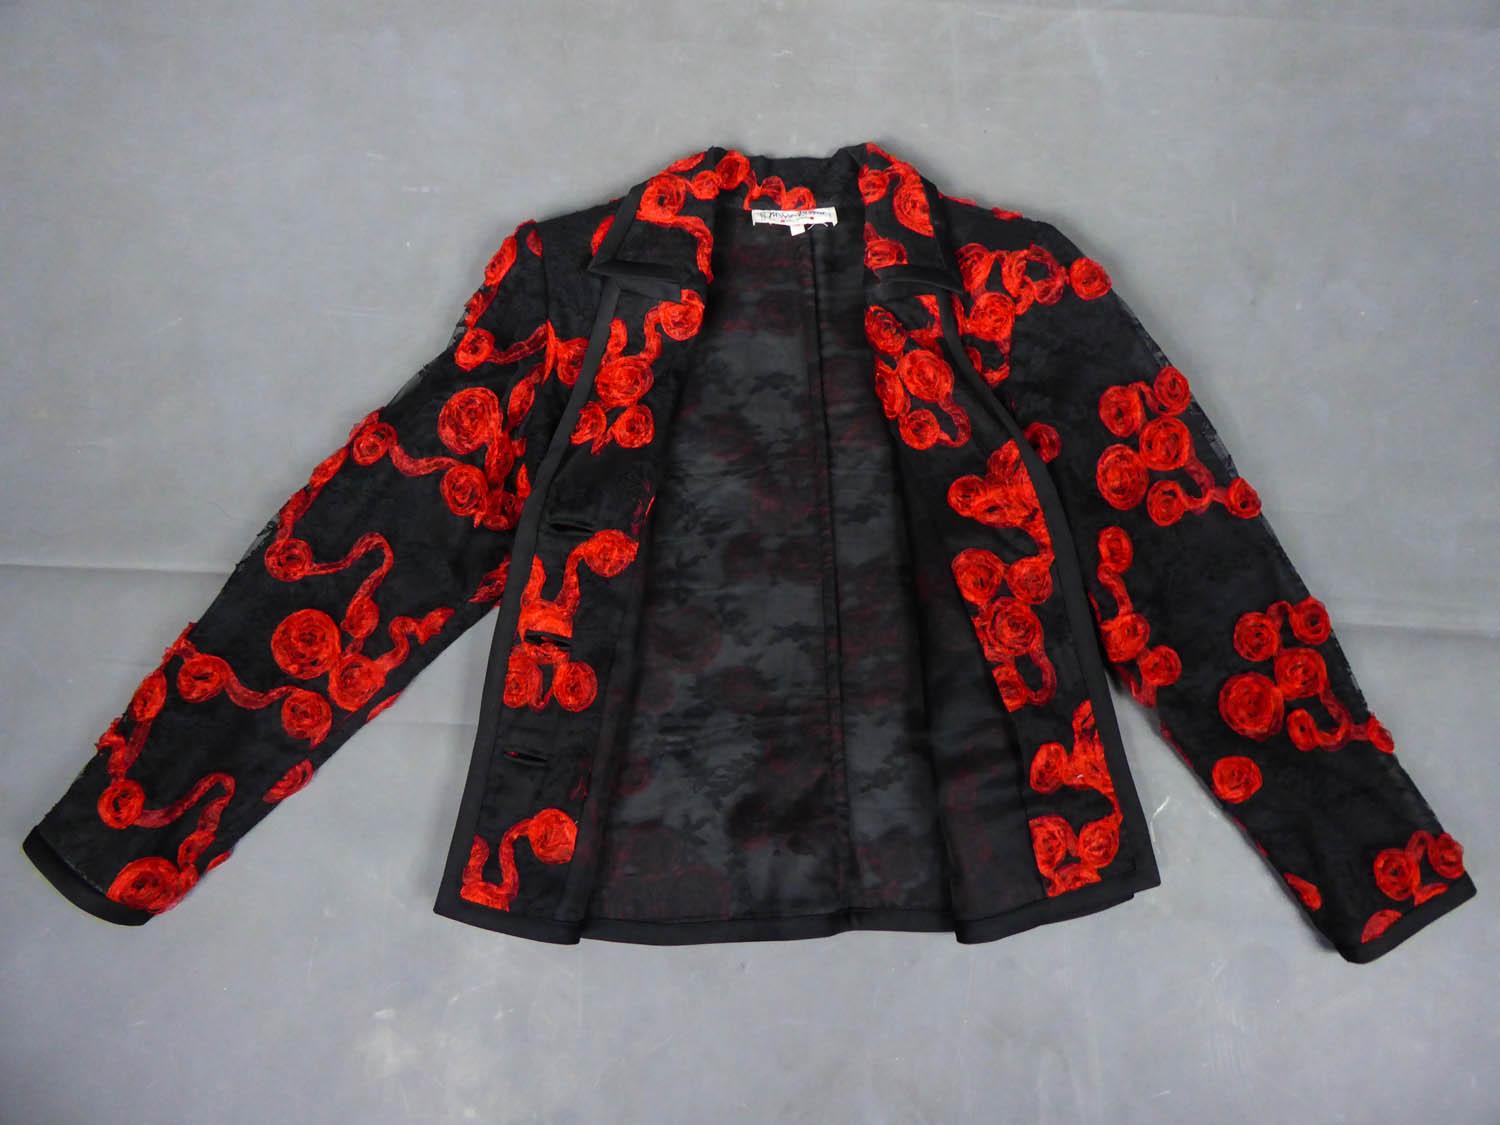 Circa 1980
France

Black lace jacket embroidered and applied with red flowers in organza ribbon. Fitted cut with wide collar, edge of the jacket in black satin. Front closure with three buttons representing a four-leaf clover. Label white background